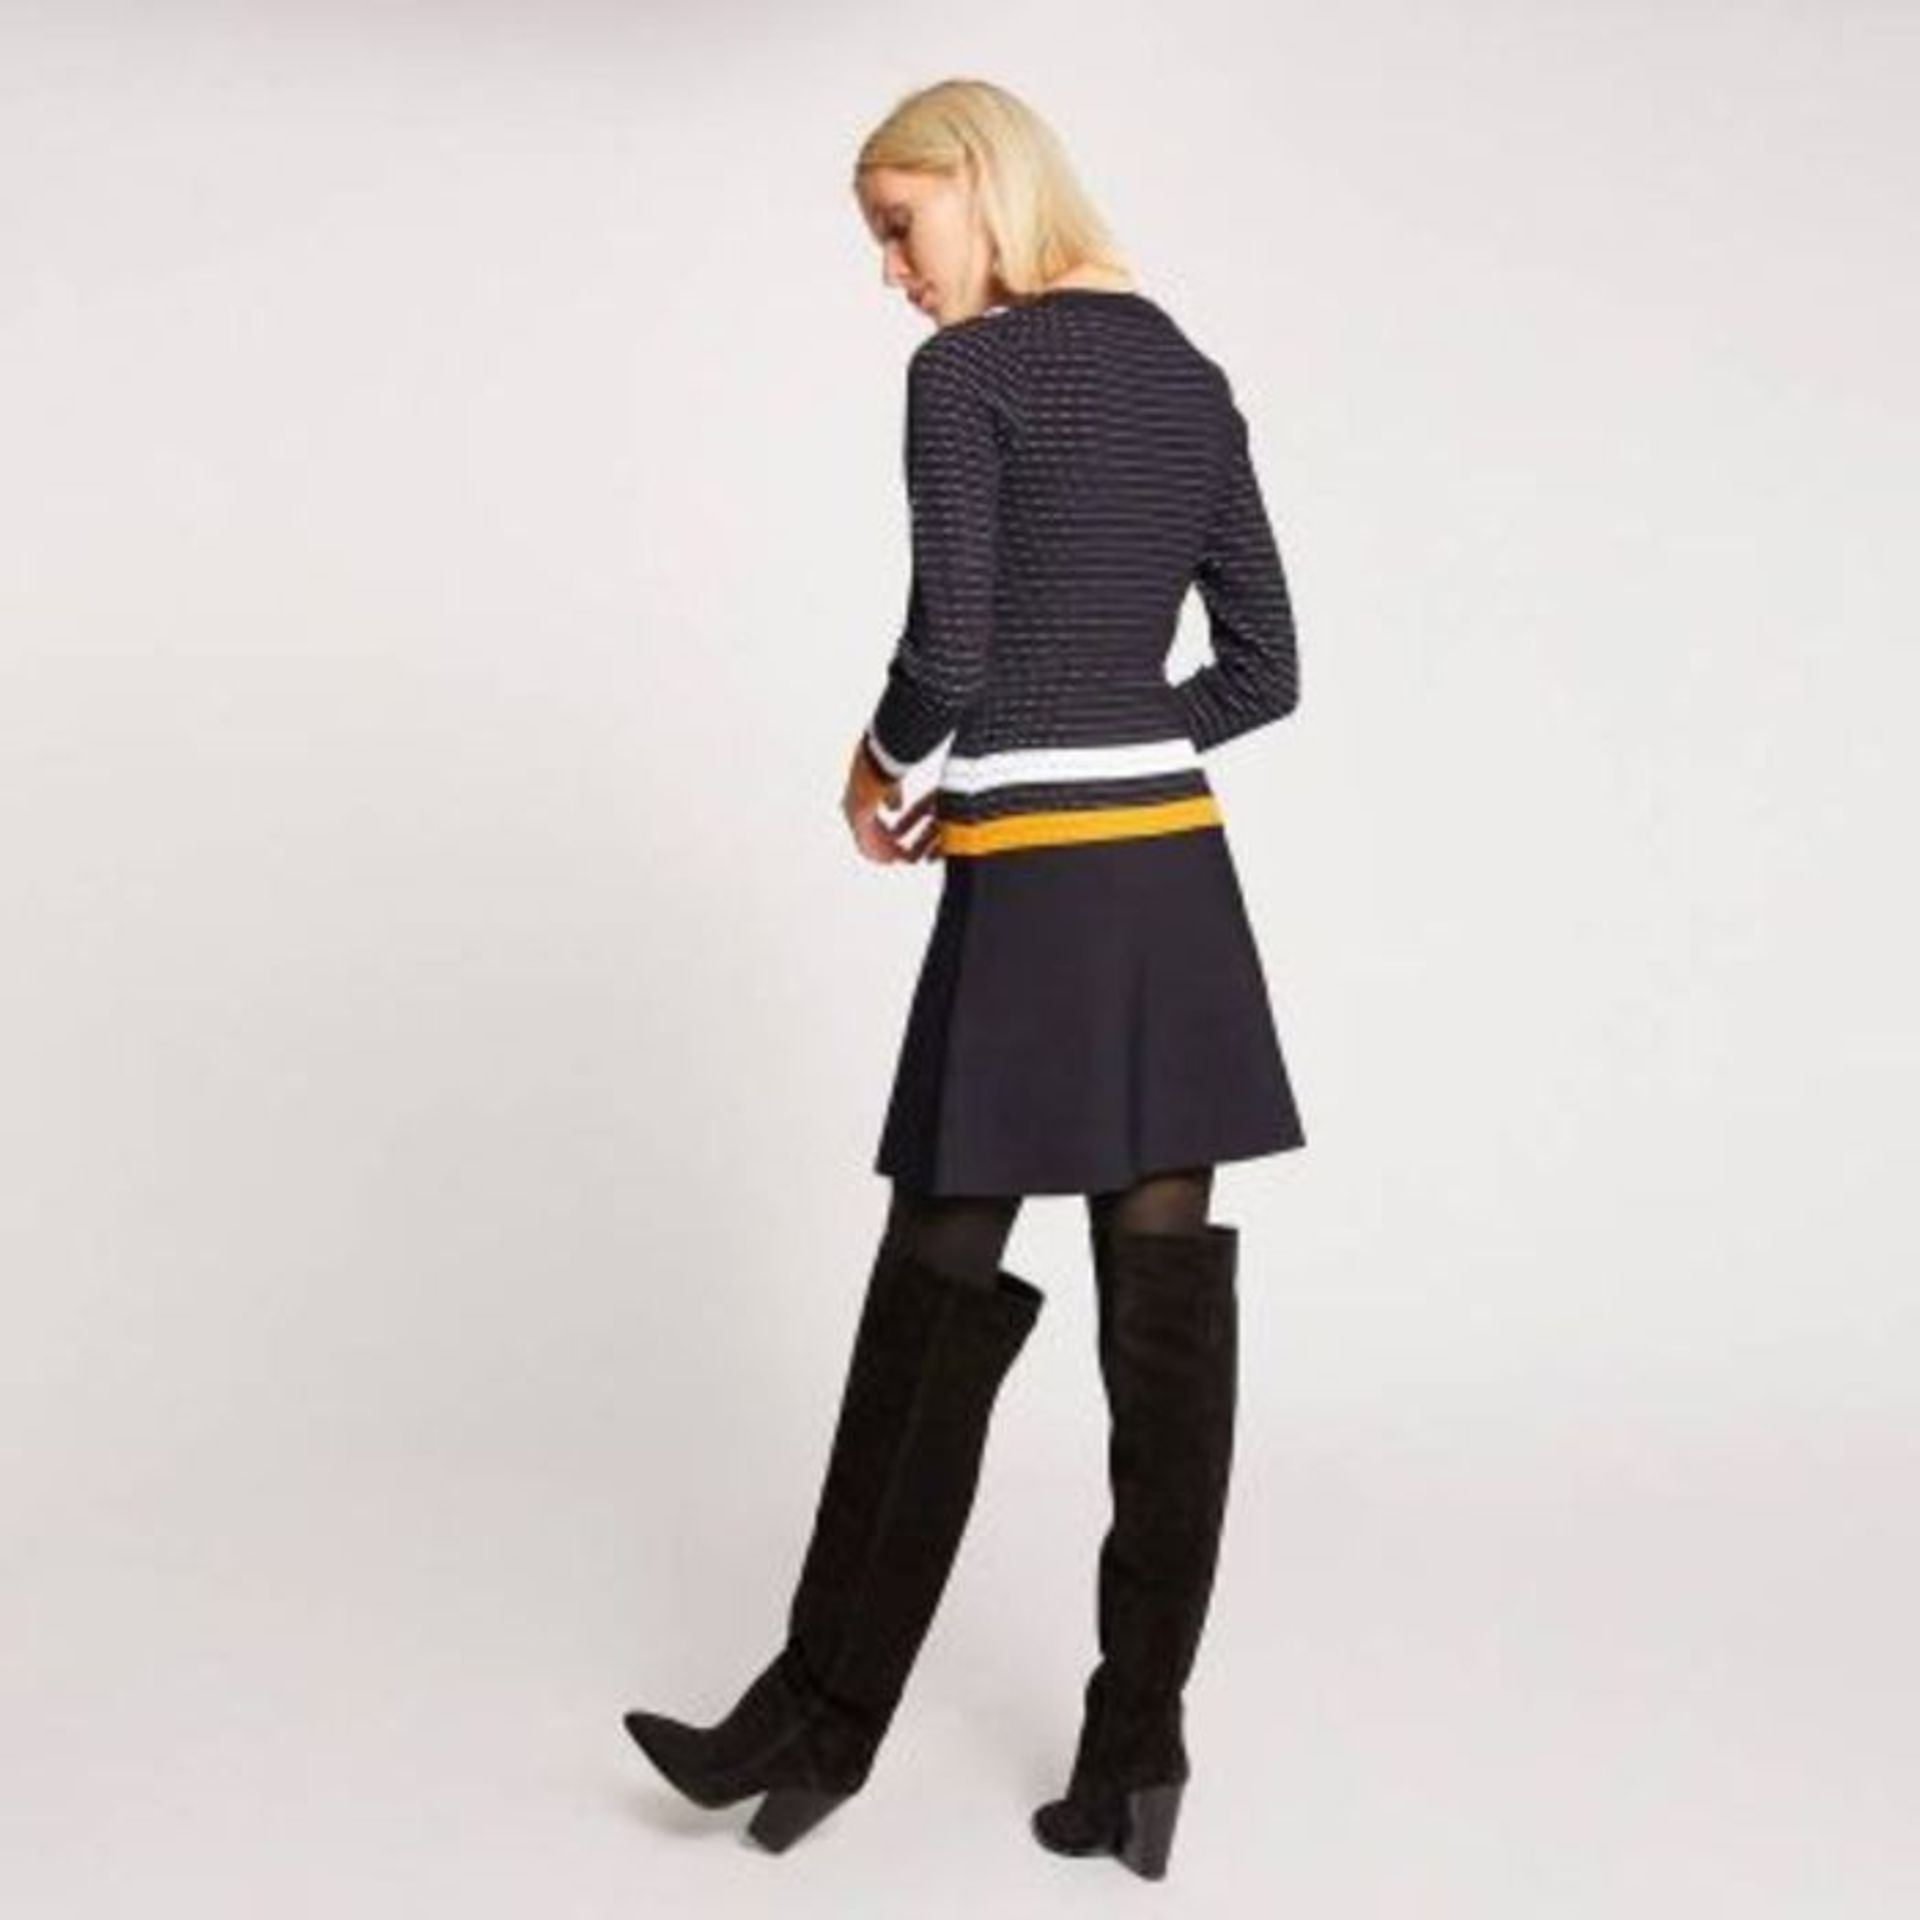 MORGAN - STRIPED RIBBED FLARED DRESS WITH LONG SLEEVES - NAVY / MUSTARD - SIZE: UK 10. RRP £62.00 AS - Image 3 of 4